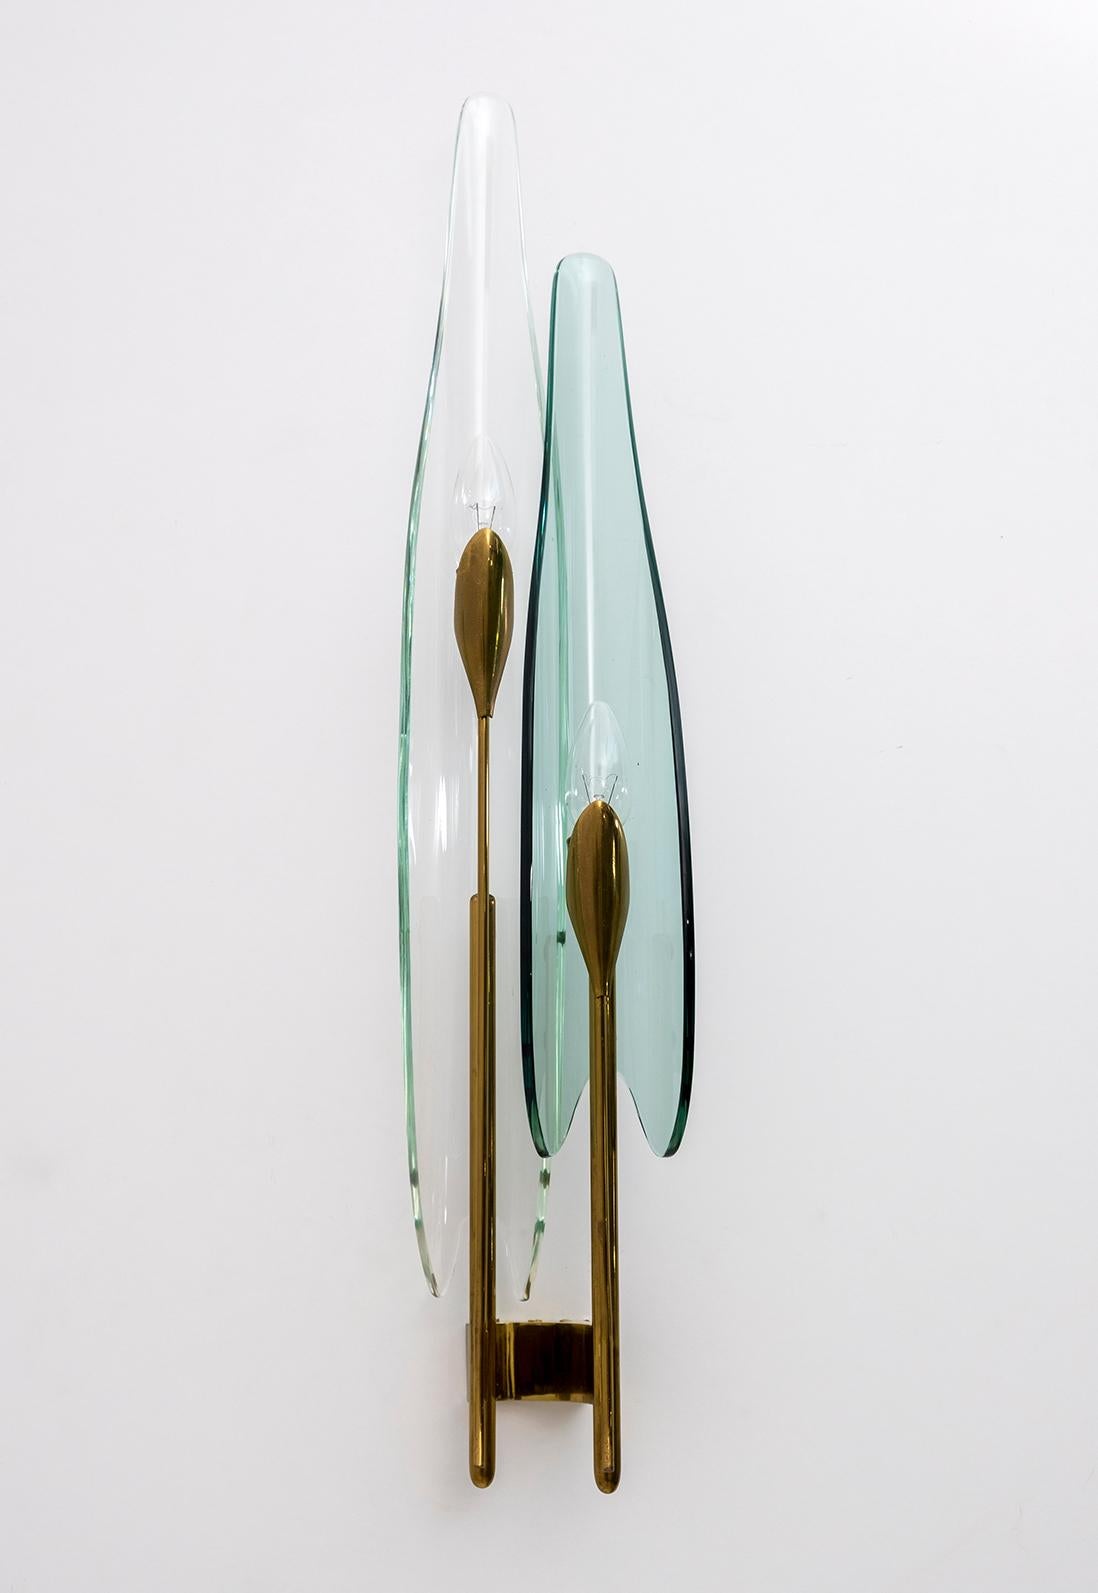 To be taken into consideration, five Dahlia wall lights by Max Igrand for Fontana Arte, Italy, circa 1950s. Bronze and artistic glass. Excellent original vintage condition, not restored. The glass has different shades, green and light green. The